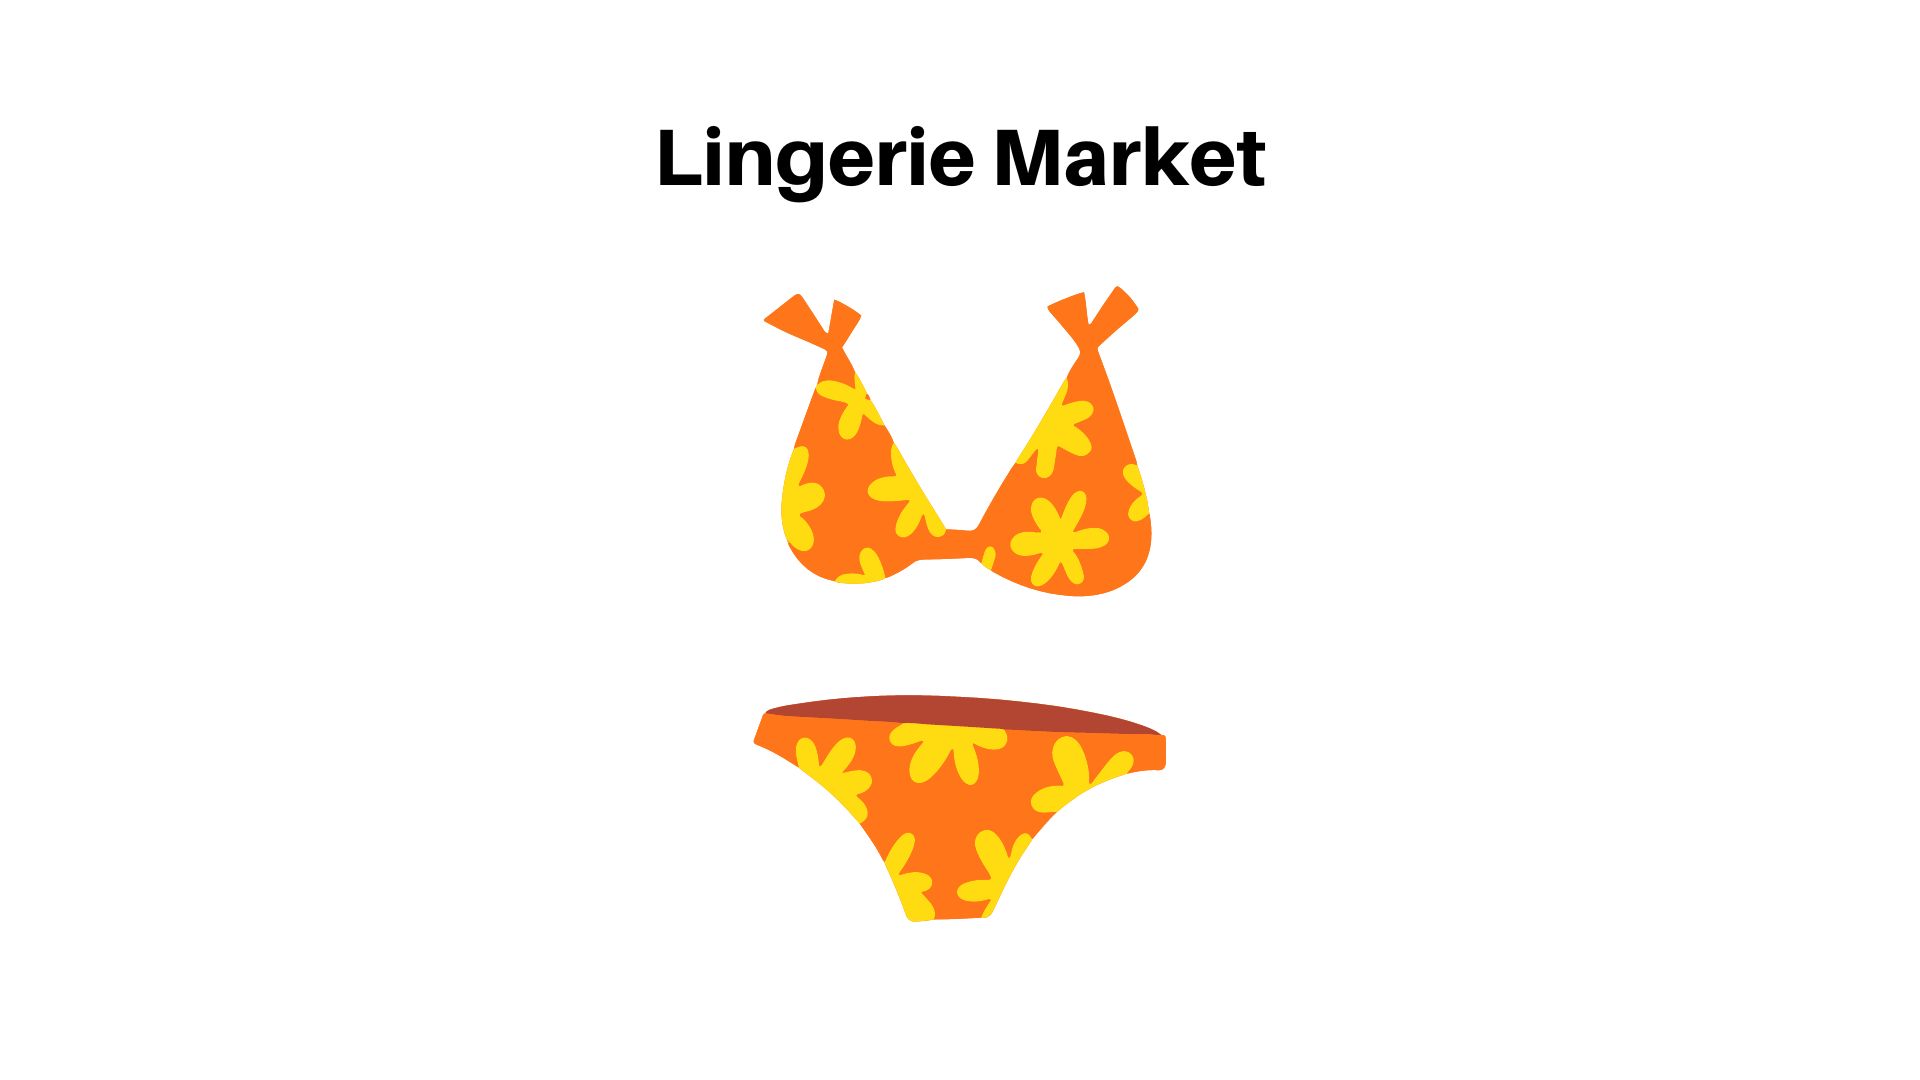 Lingerie Market is estimated to be worth US$ 72.87 Billion by 2032-end with a CAGR of 7.10%